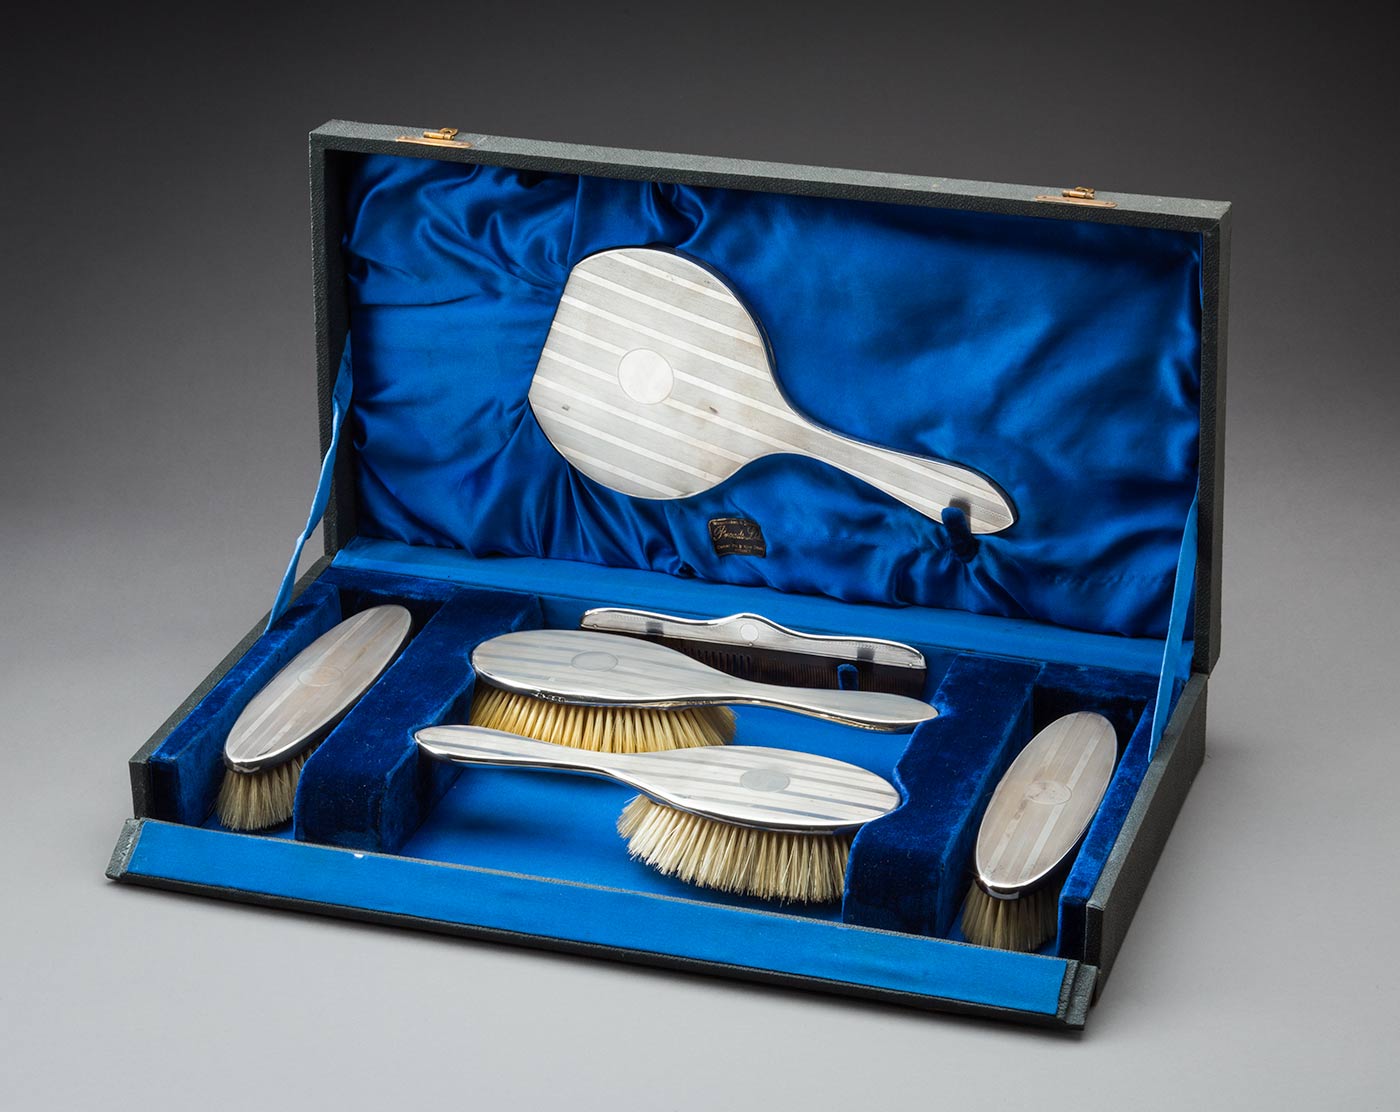 Blue velvet lined dressing case holding two hair brushes, two clothes brushes, a comb and a mirror.